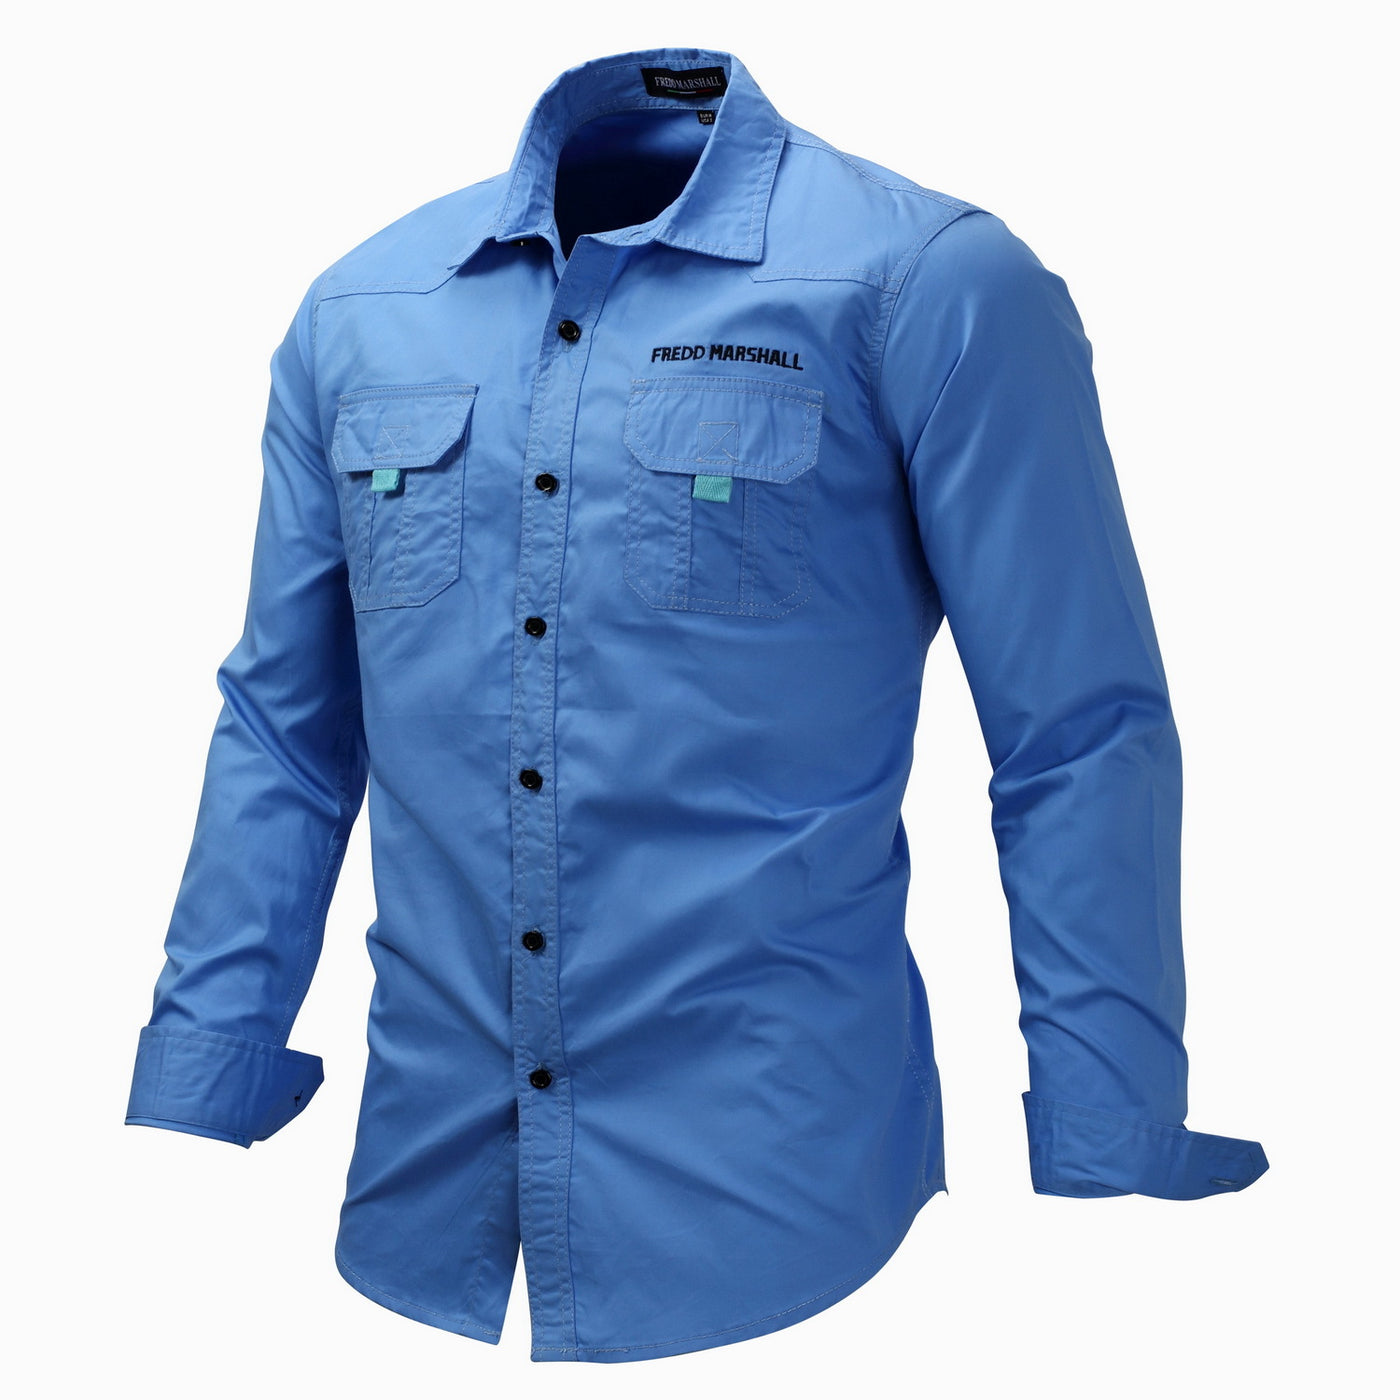 CASUAL STYLISH MILITARY OUTDOOR WORK SHIRT #002